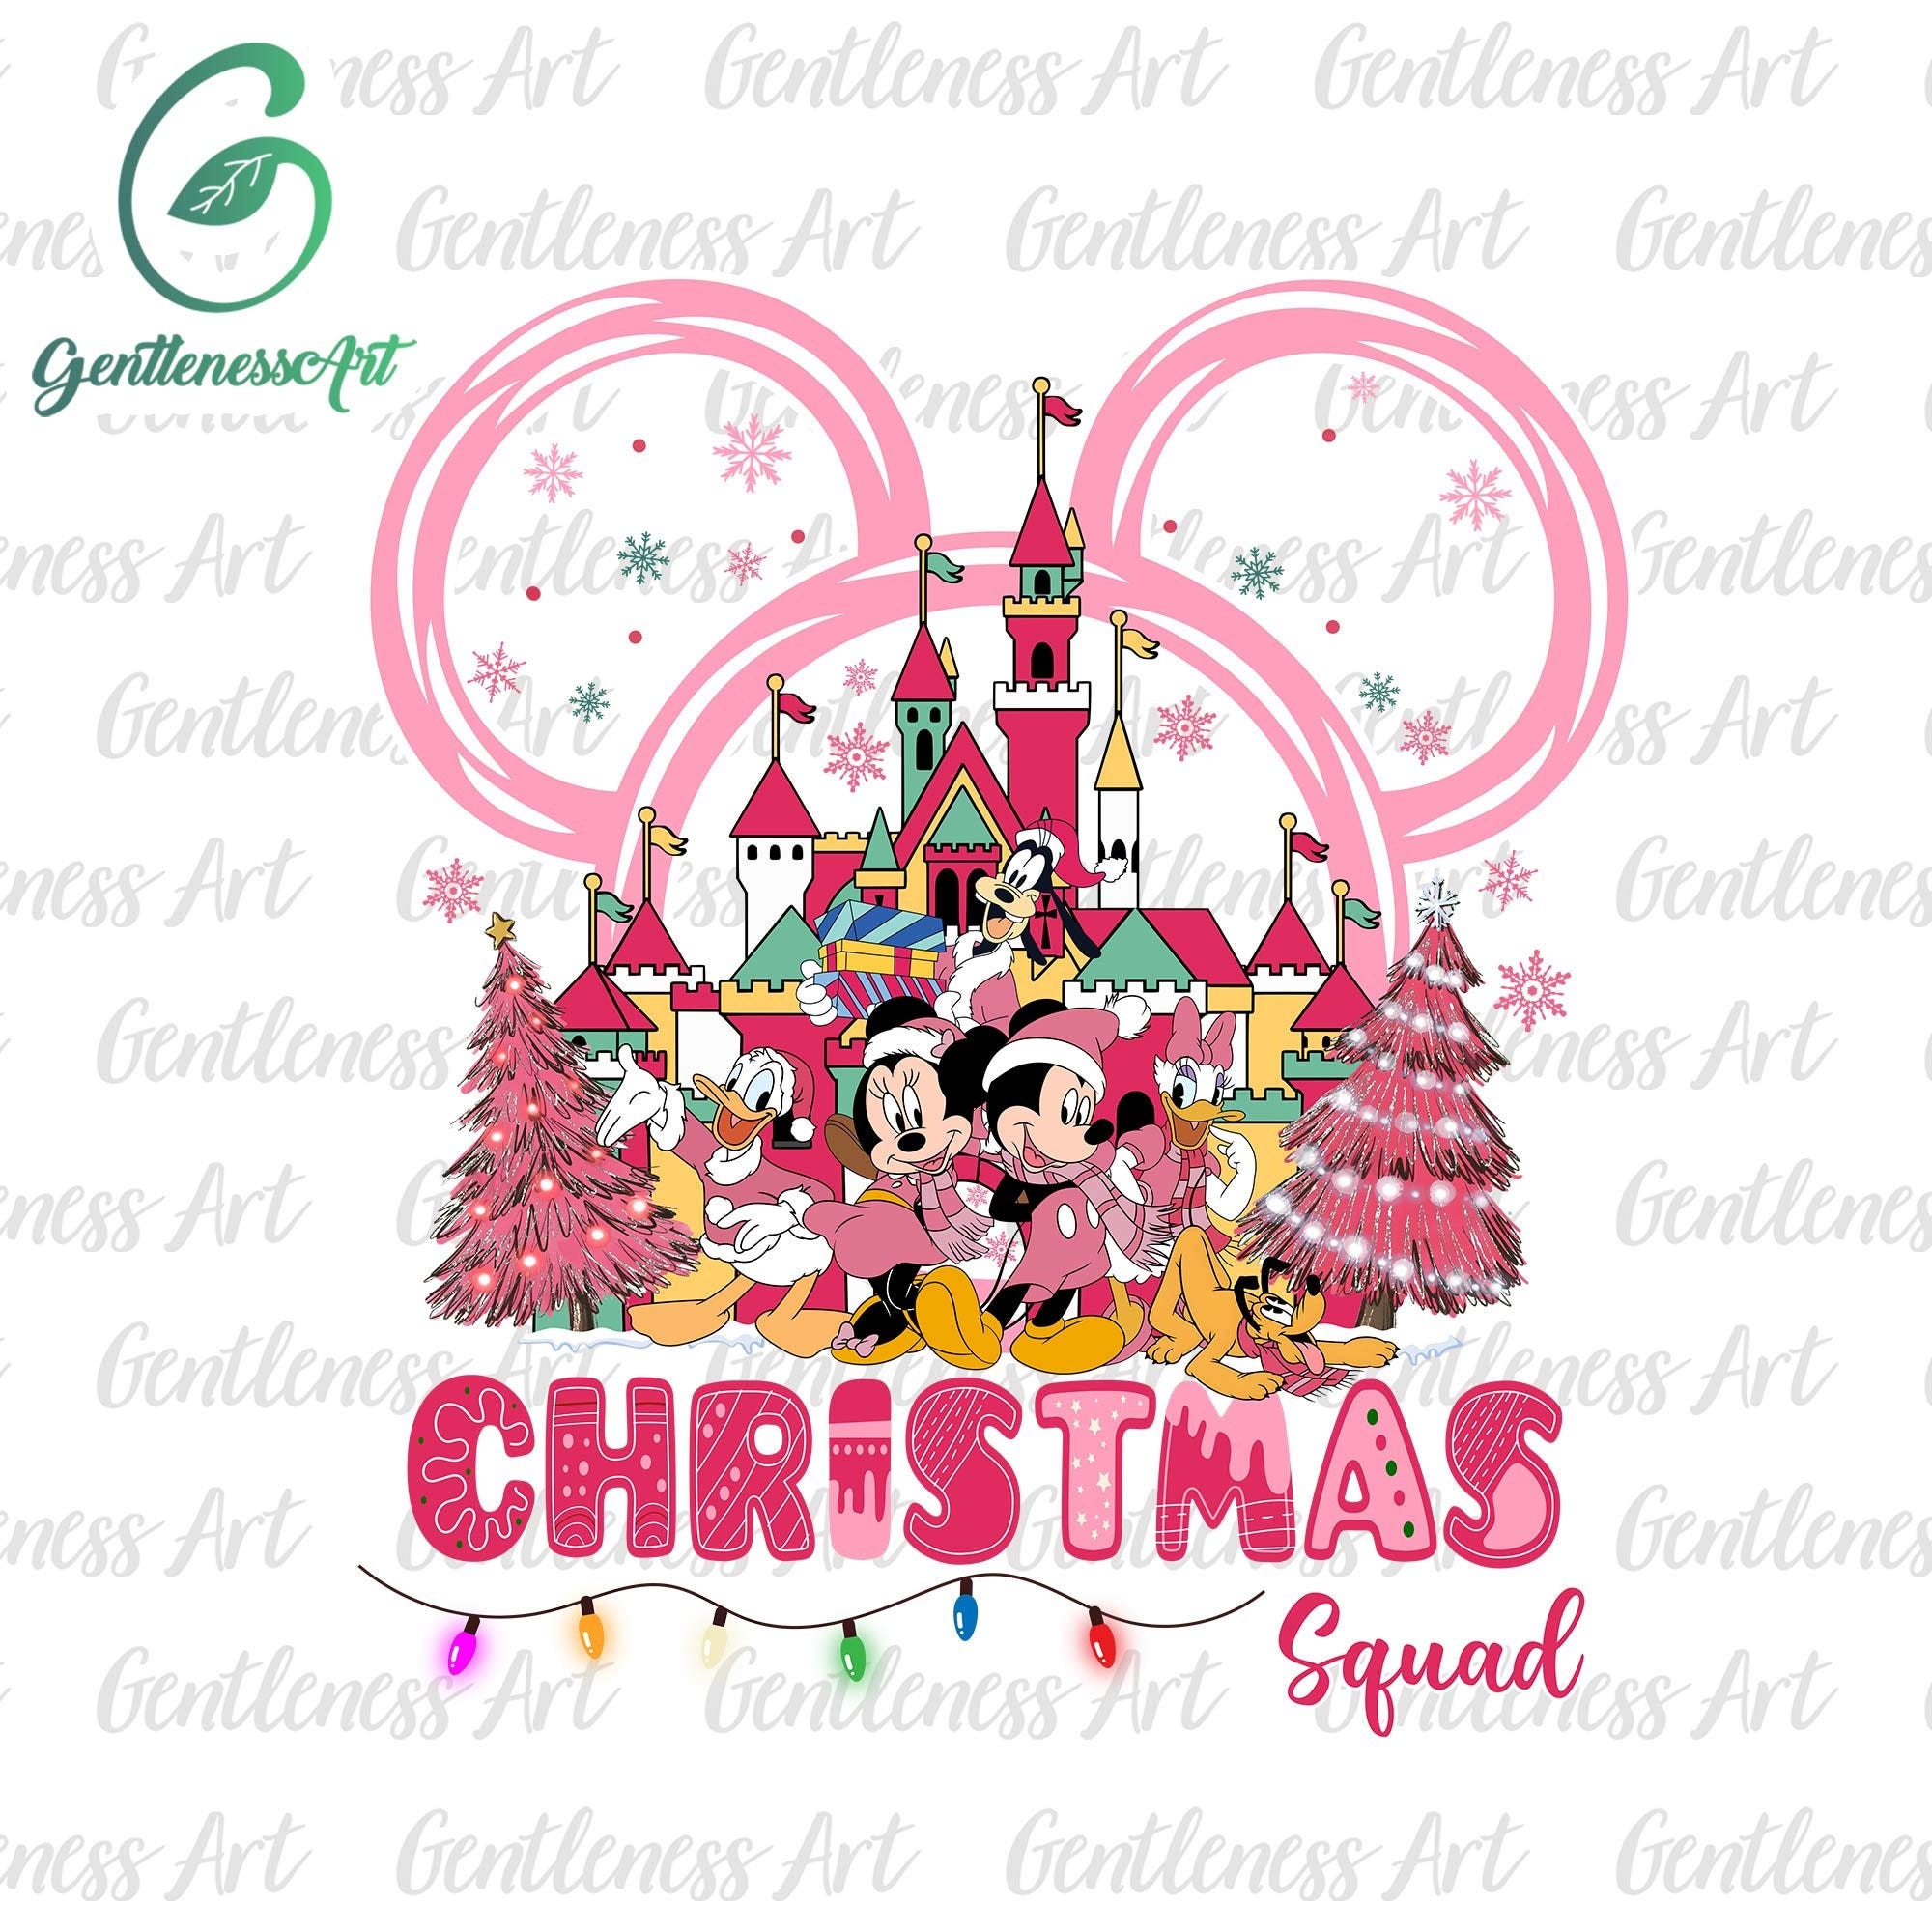 Merry Christmas Png, Pink Christmas Tree Png, Christmas Mouse And Friends, Christmas Squad Png, Pink Christmas Png, Xmas Holiday Png